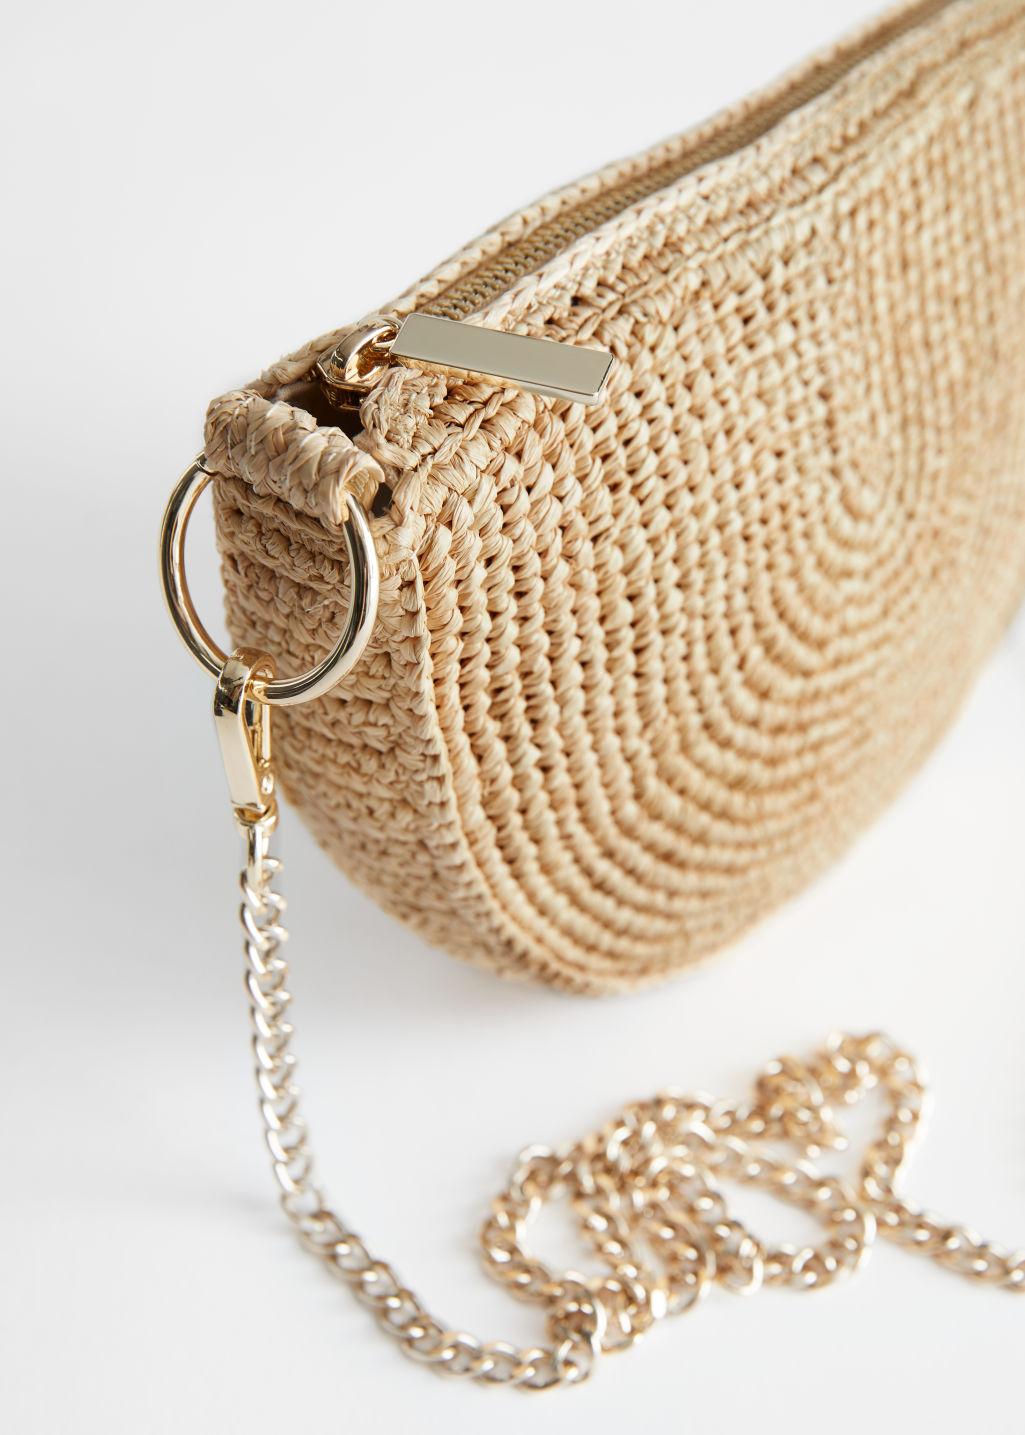 & Other Stories Half Moon Straw Crossbody Bag in Natural | Lyst UK